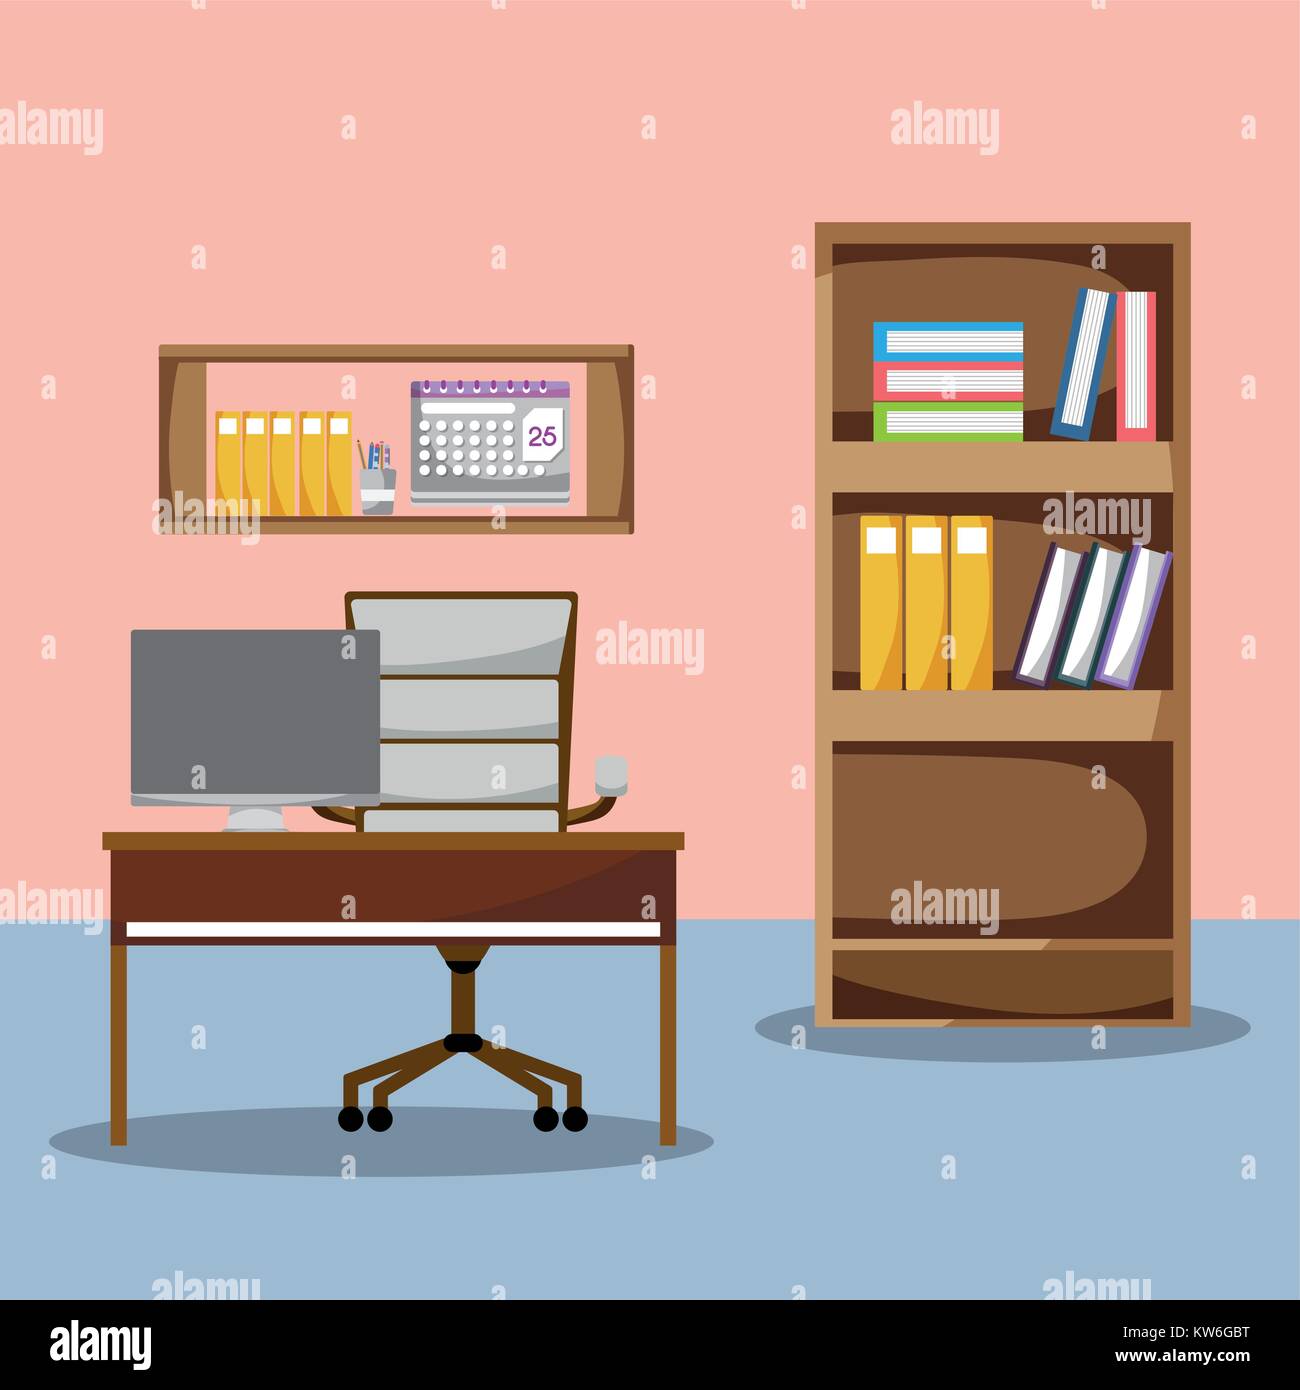 https://c8.alamy.com/comp/KW6GBT/office-with-desk-and-accessories-flat-to-work-vector-illustration-KW6GBT.jpg